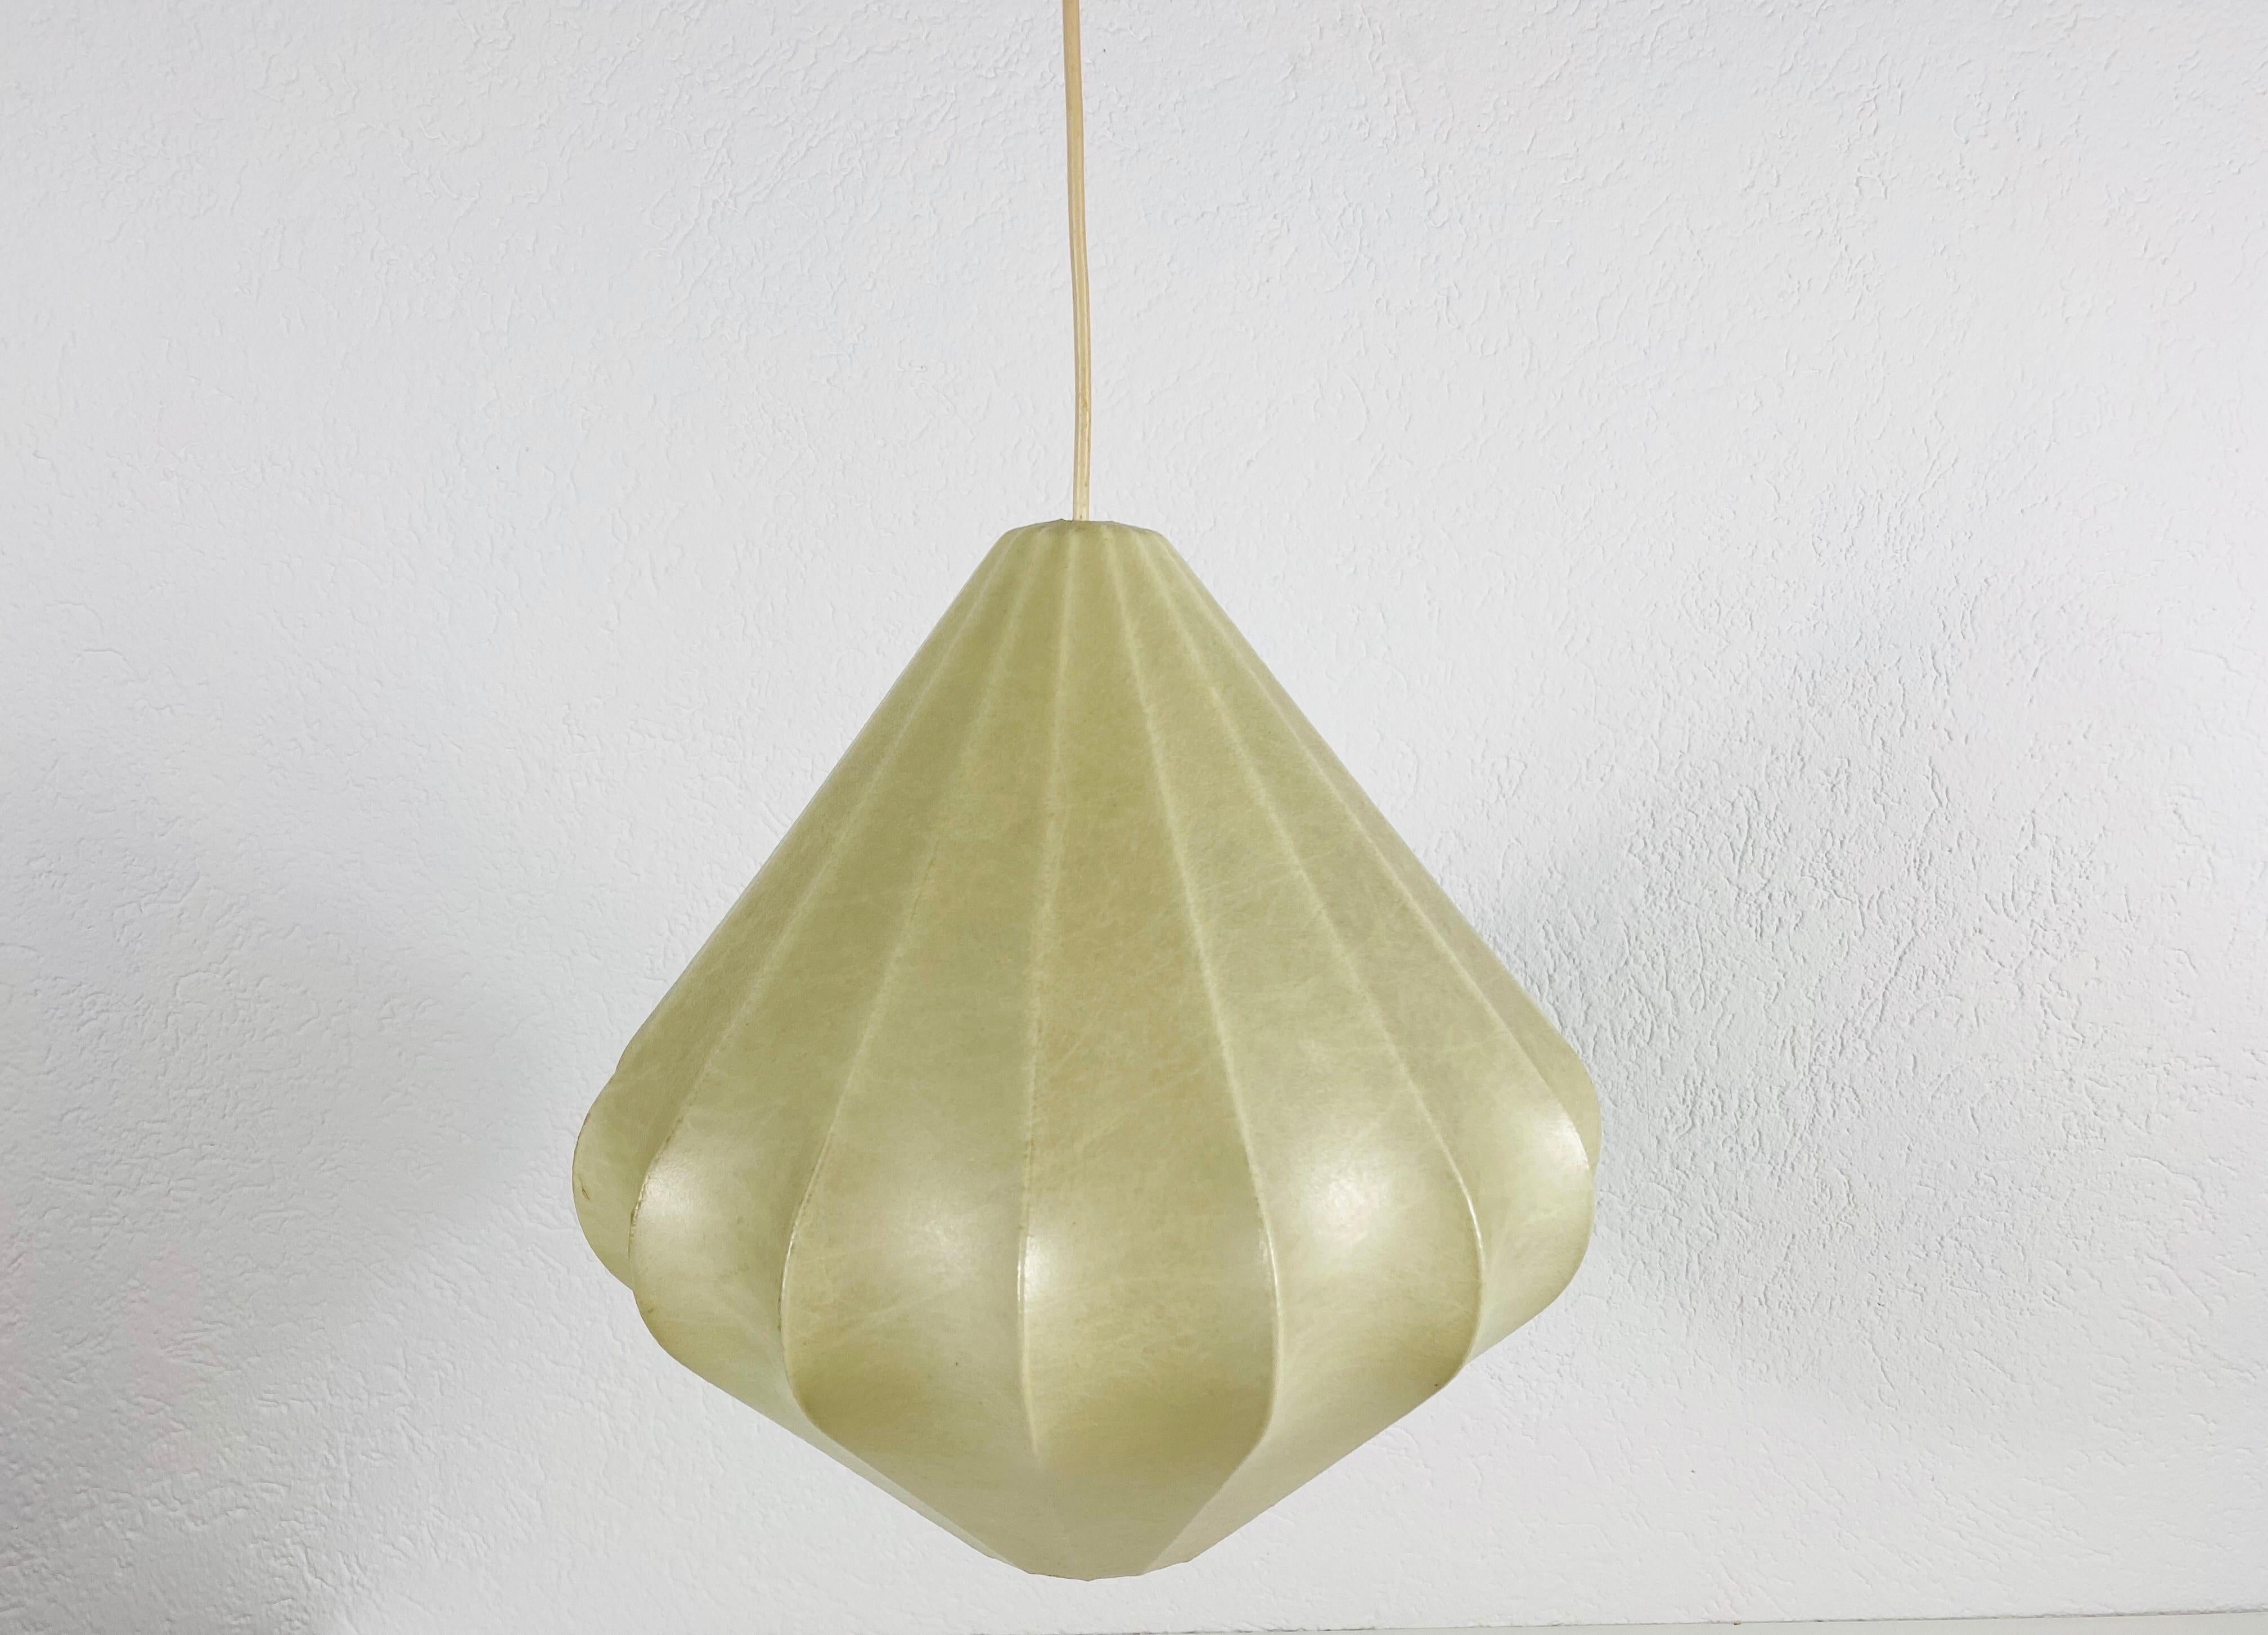 European Midcentury Cocoon Pendant Light by Achille Castiglioni for Flos, 1960s, Italy